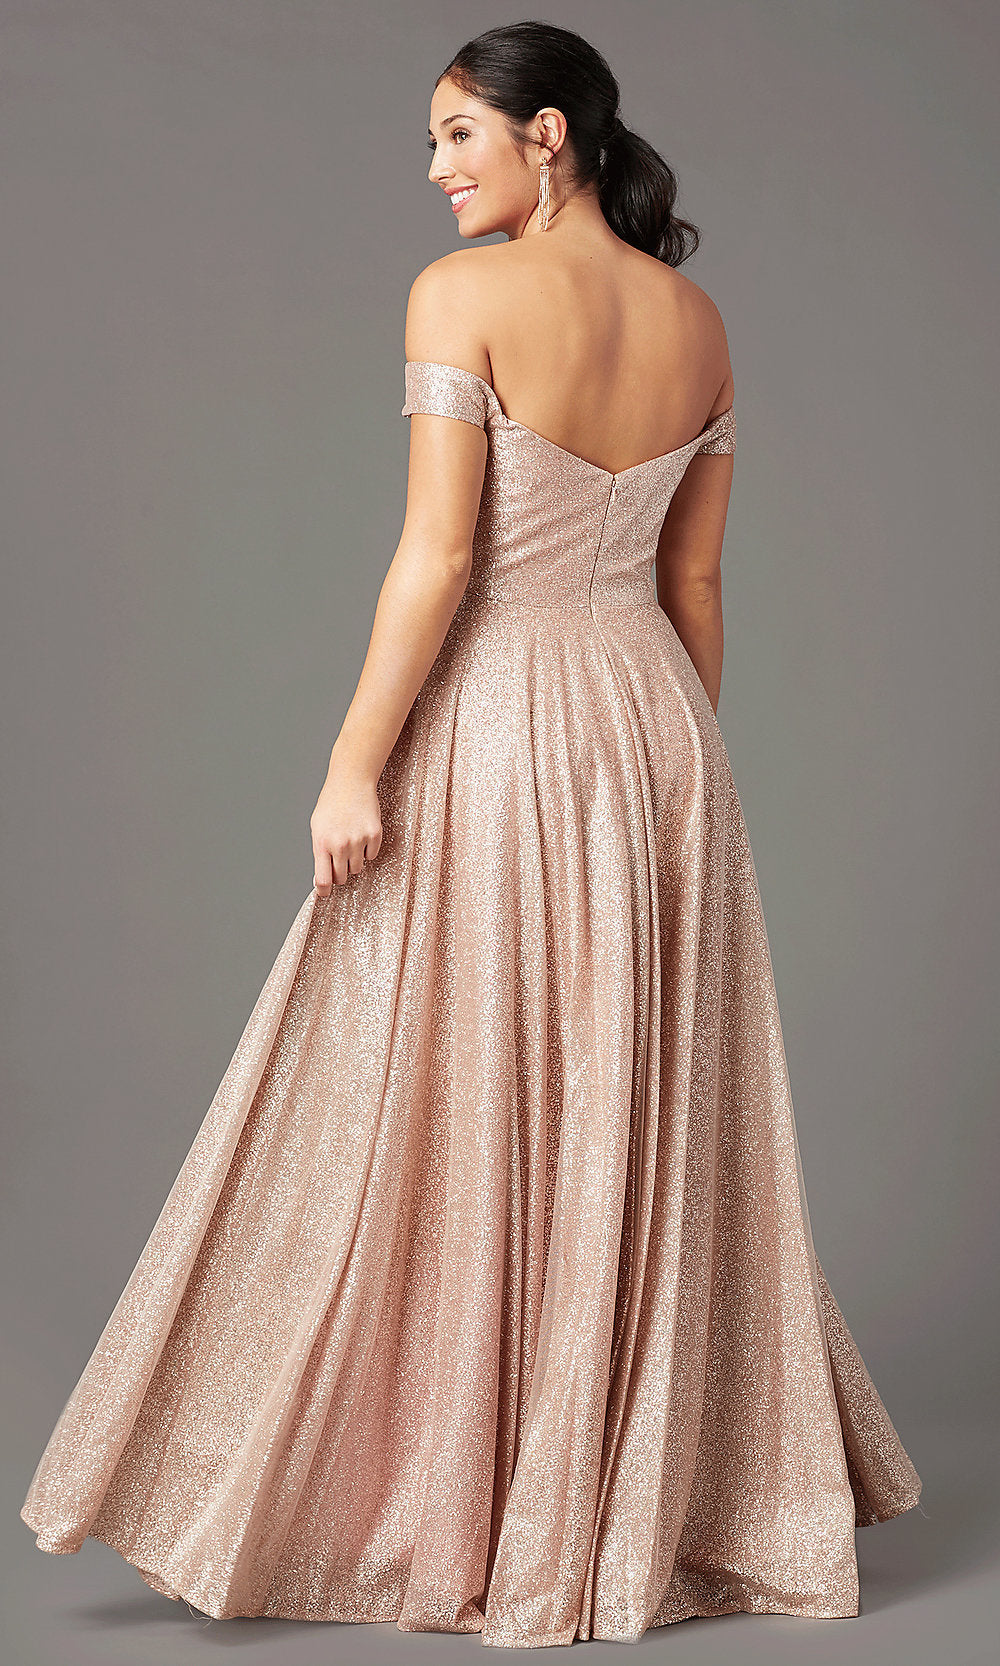 Rose Gold Sparkly Long Prom Dress by PromGirl